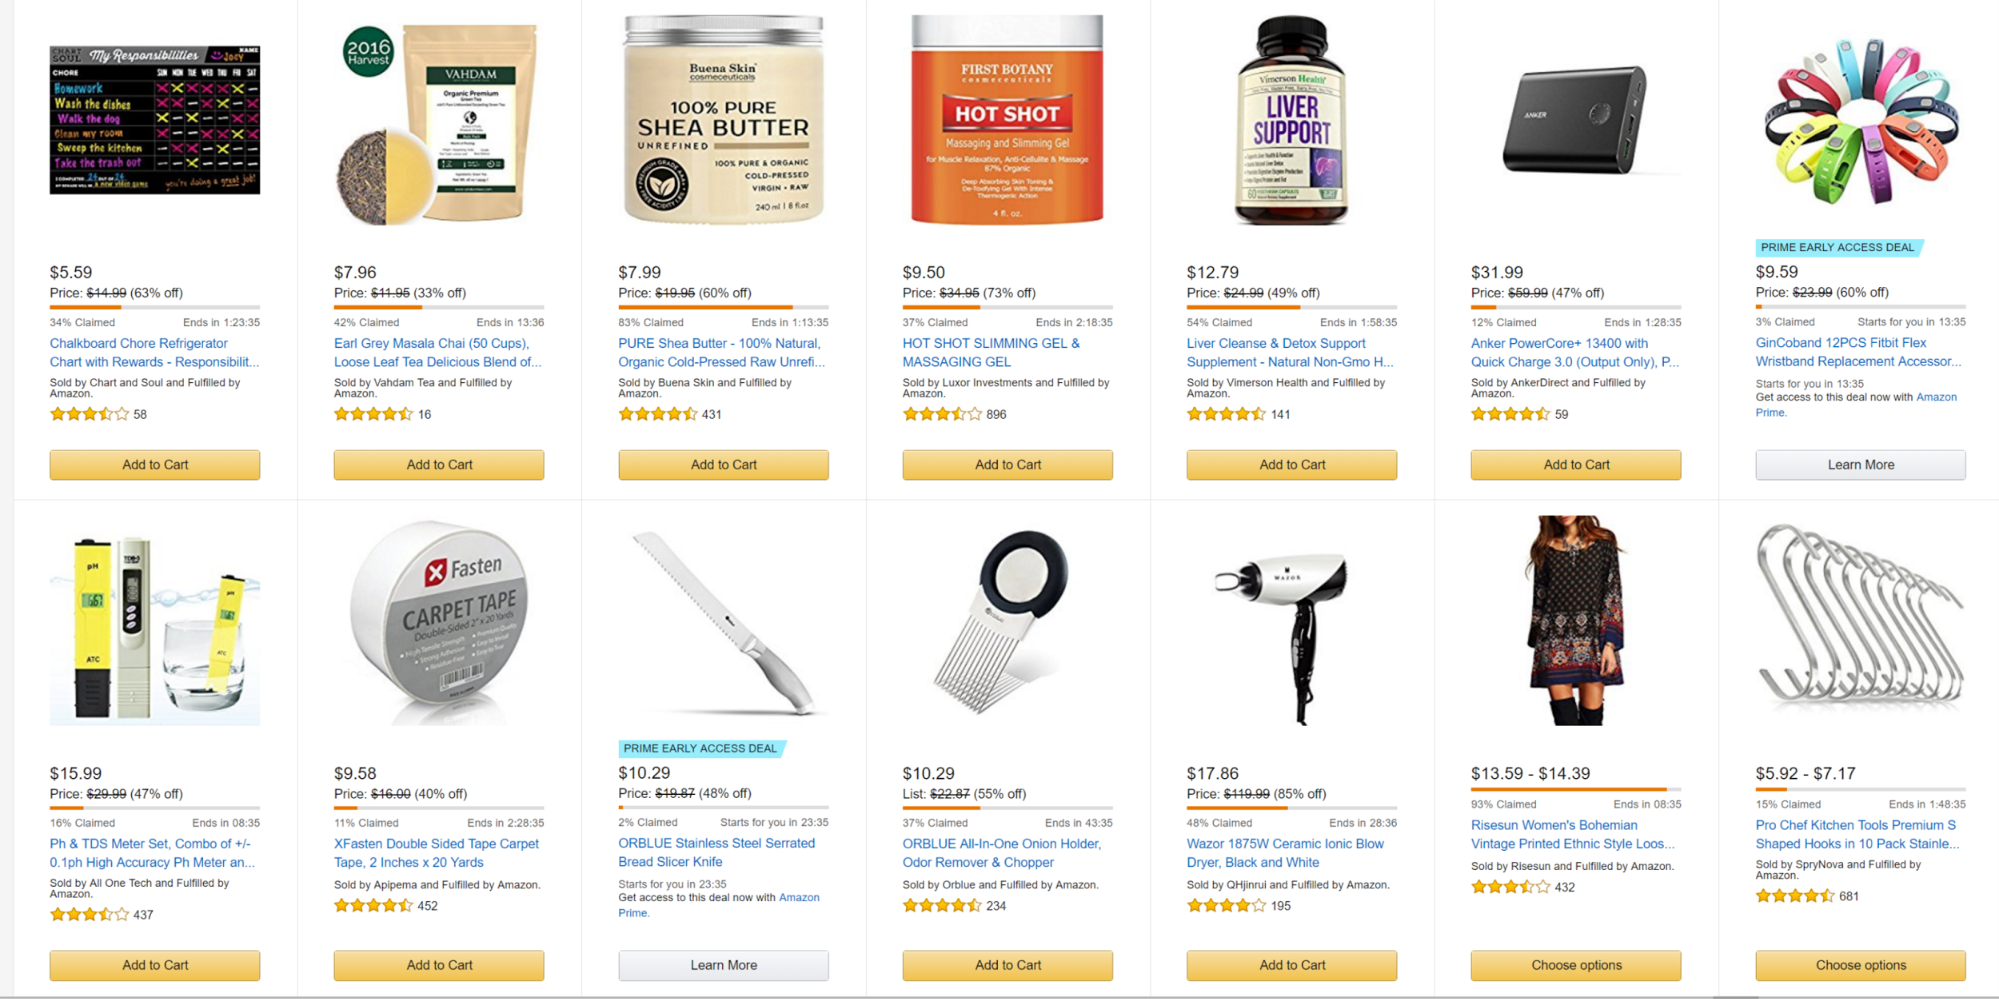 Tactics for product promotions let you sell products faster on Amazon